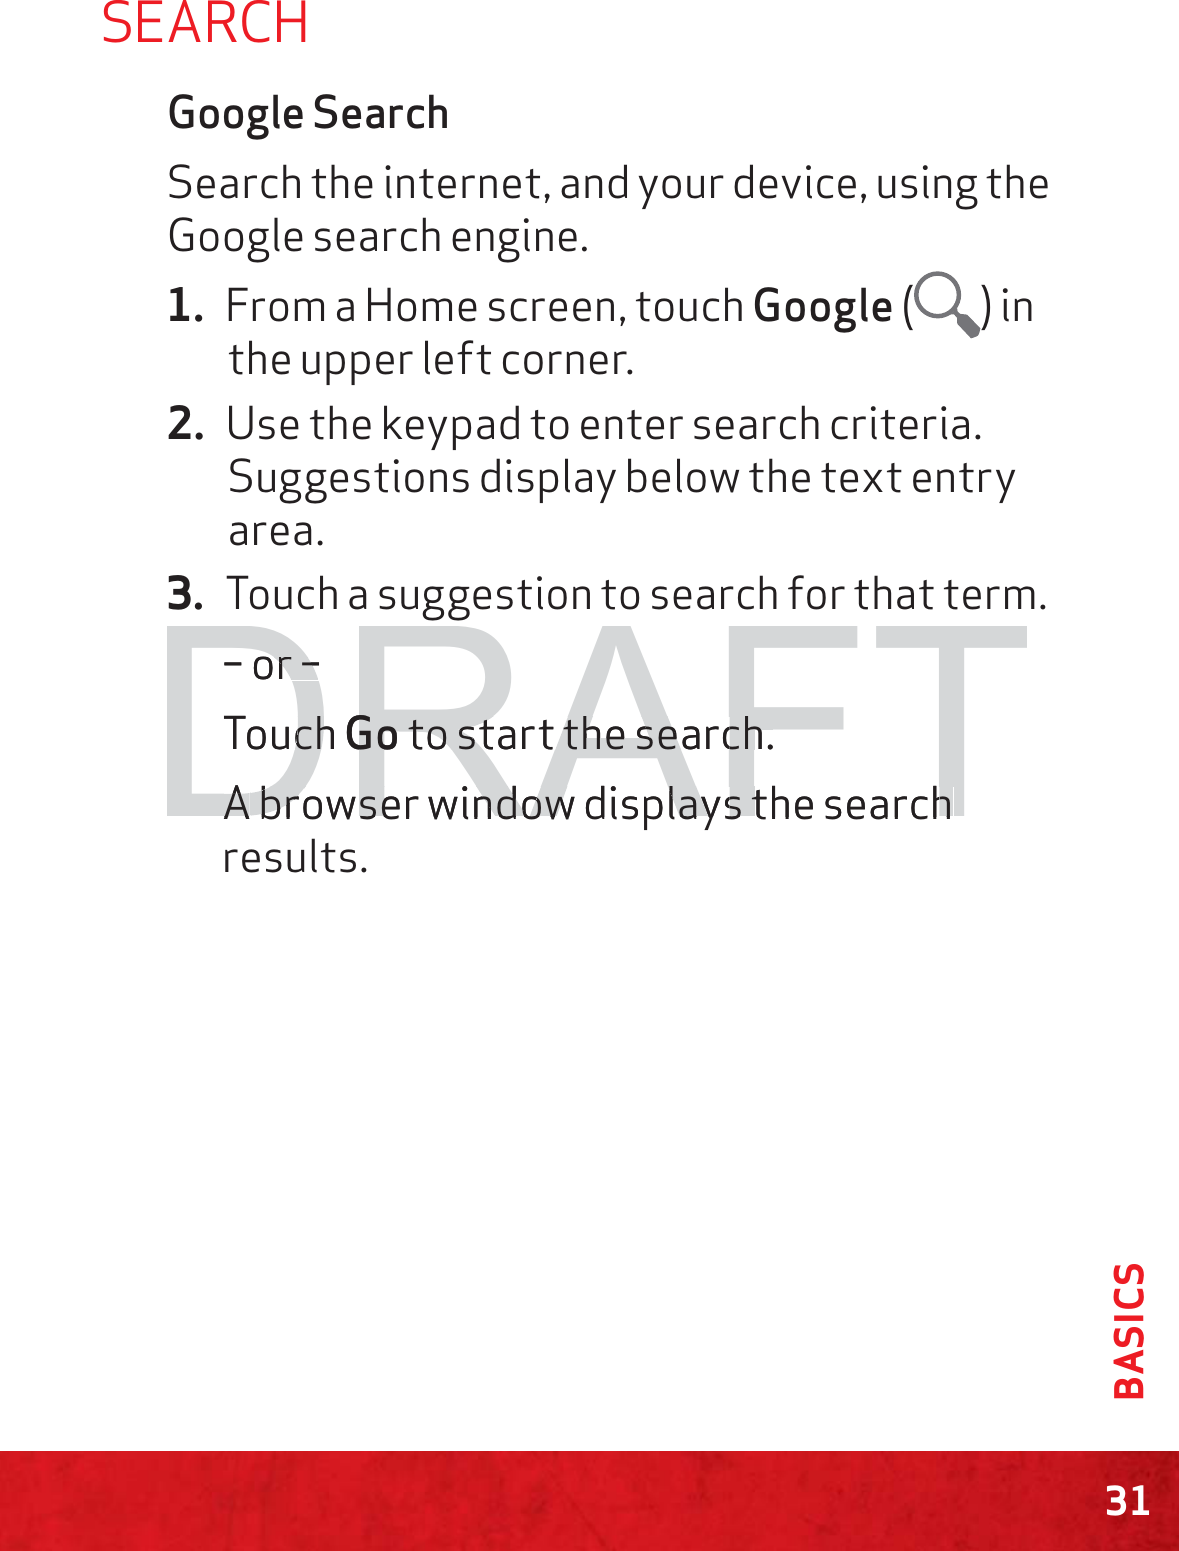 31BASICSSEARCHGoogle SearchSearch the internet, and your device, using the Google search engine.1. From a Home screen, touch Google ( ) in the upper left corner.2. Use the keypad to enter search criteria. Suggestions display below the text entry area.3. Touch a suggestion to search for that term.– or –Touch Go to start the search.A browser window displays the search results.DRAFT– or –r –Touch chGoGo to start the search. to start the search.AAbrbrowserwindowdisplaysthesearchowserwindowdisplaysthesearch